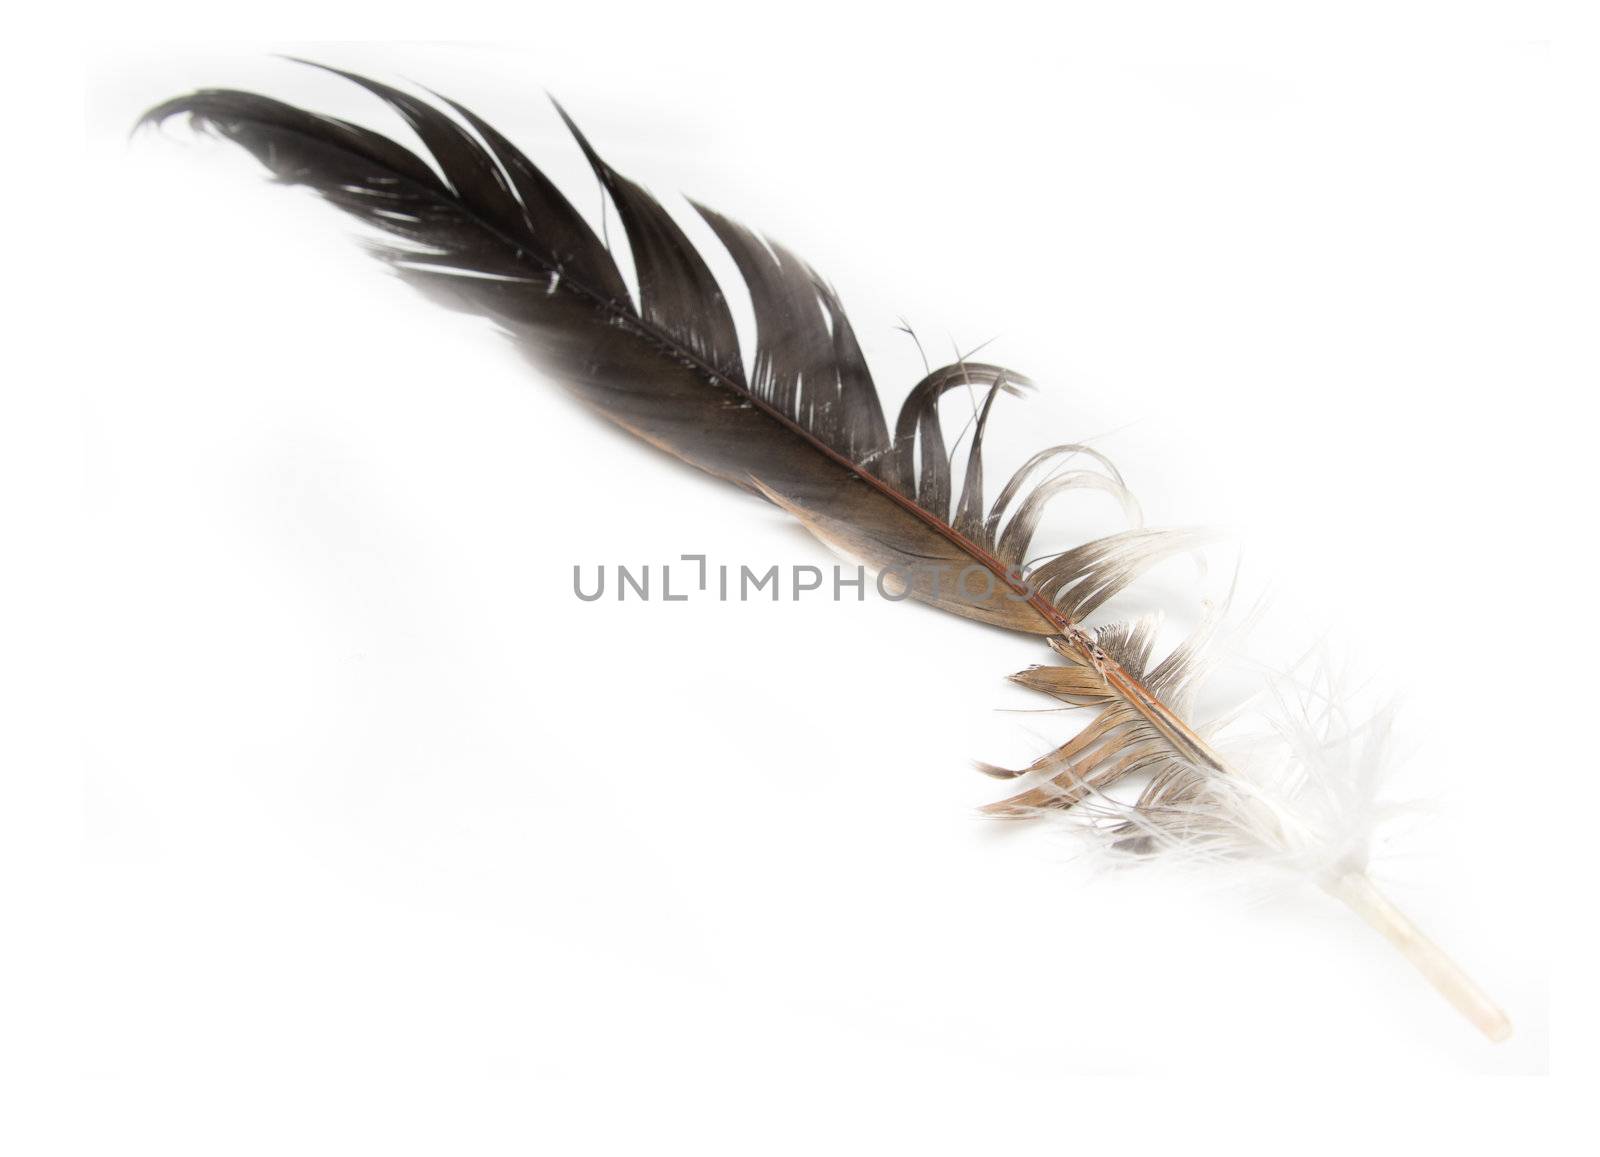 Feather of a bird on a white background by schankz